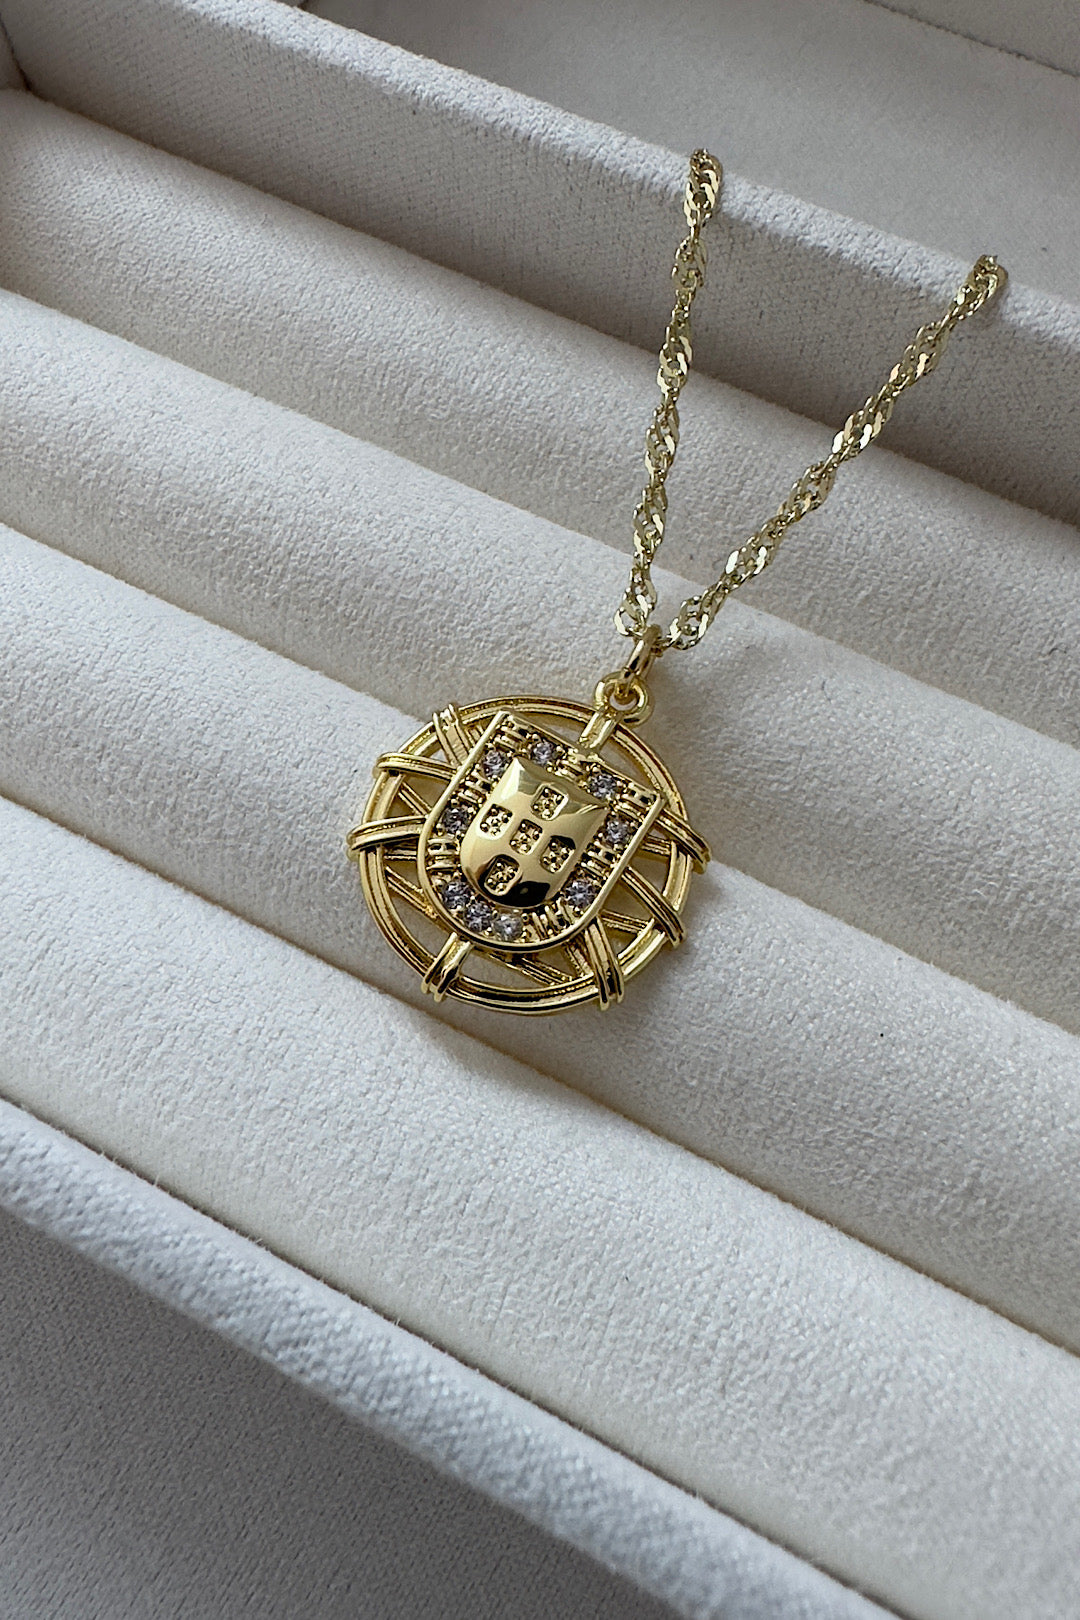 Portugal Coat of Arms Gold Swirl Necklace 